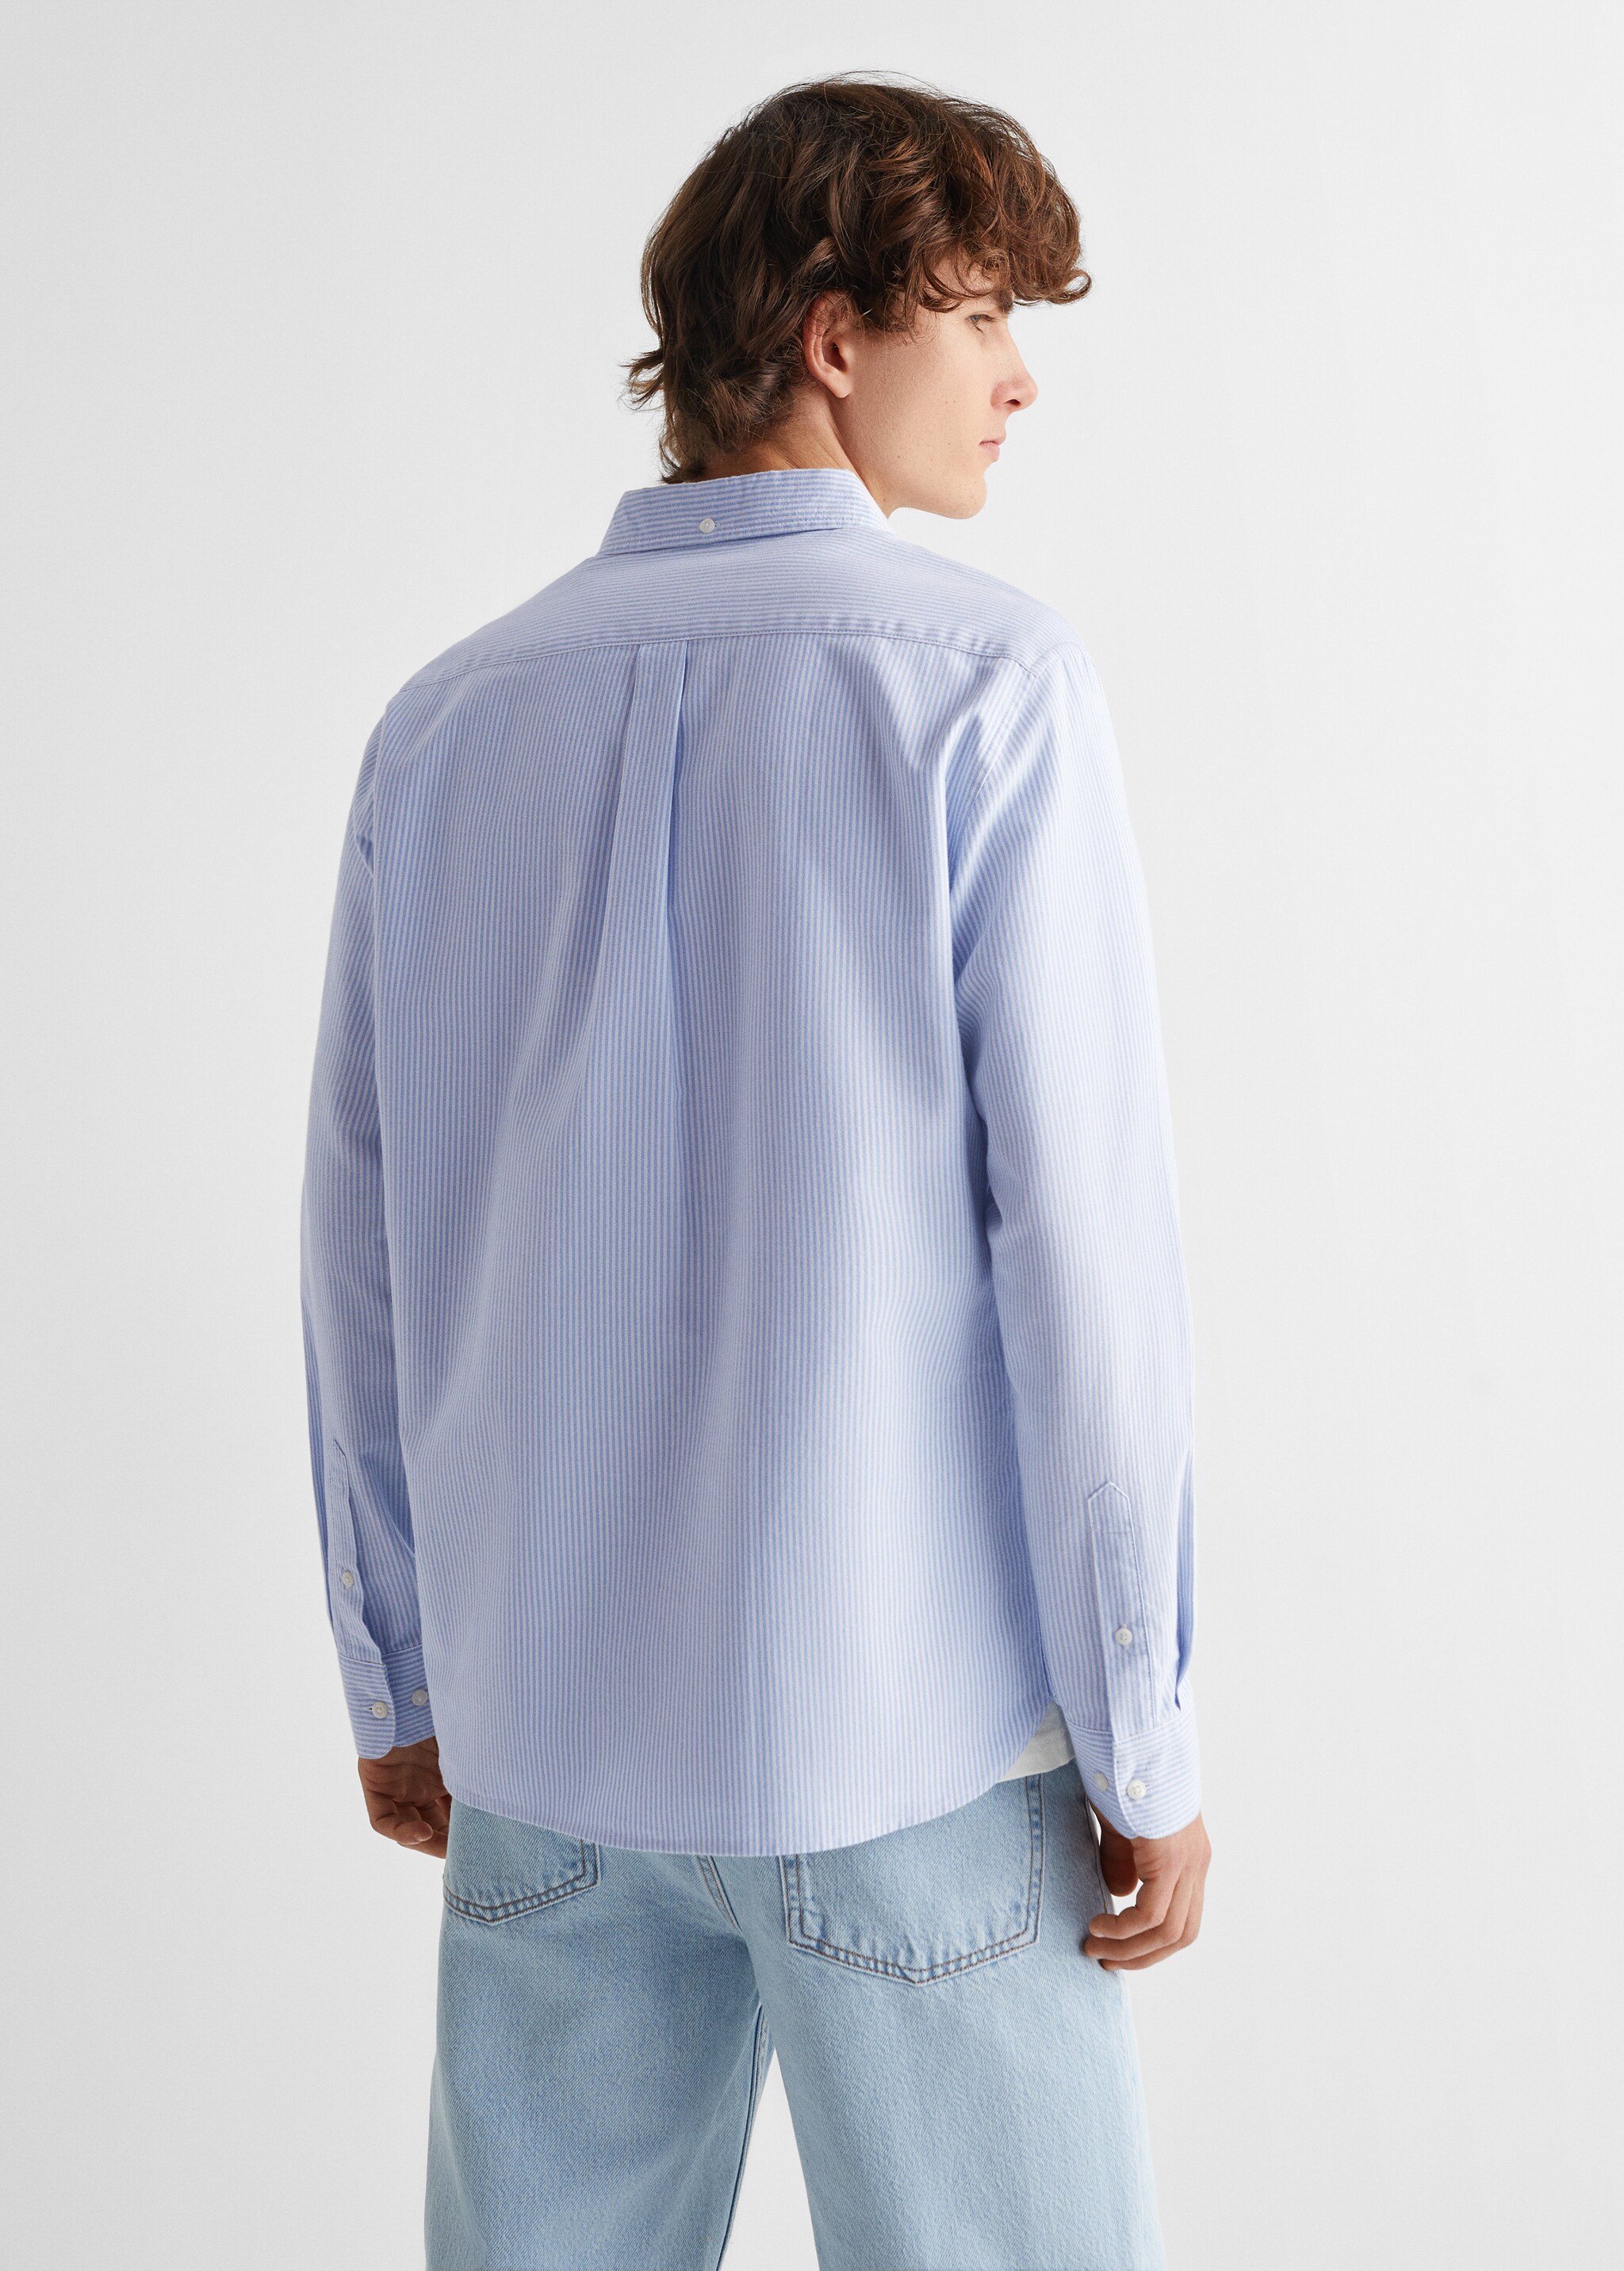 Unisex Oxford Shirt - Reverse of the article